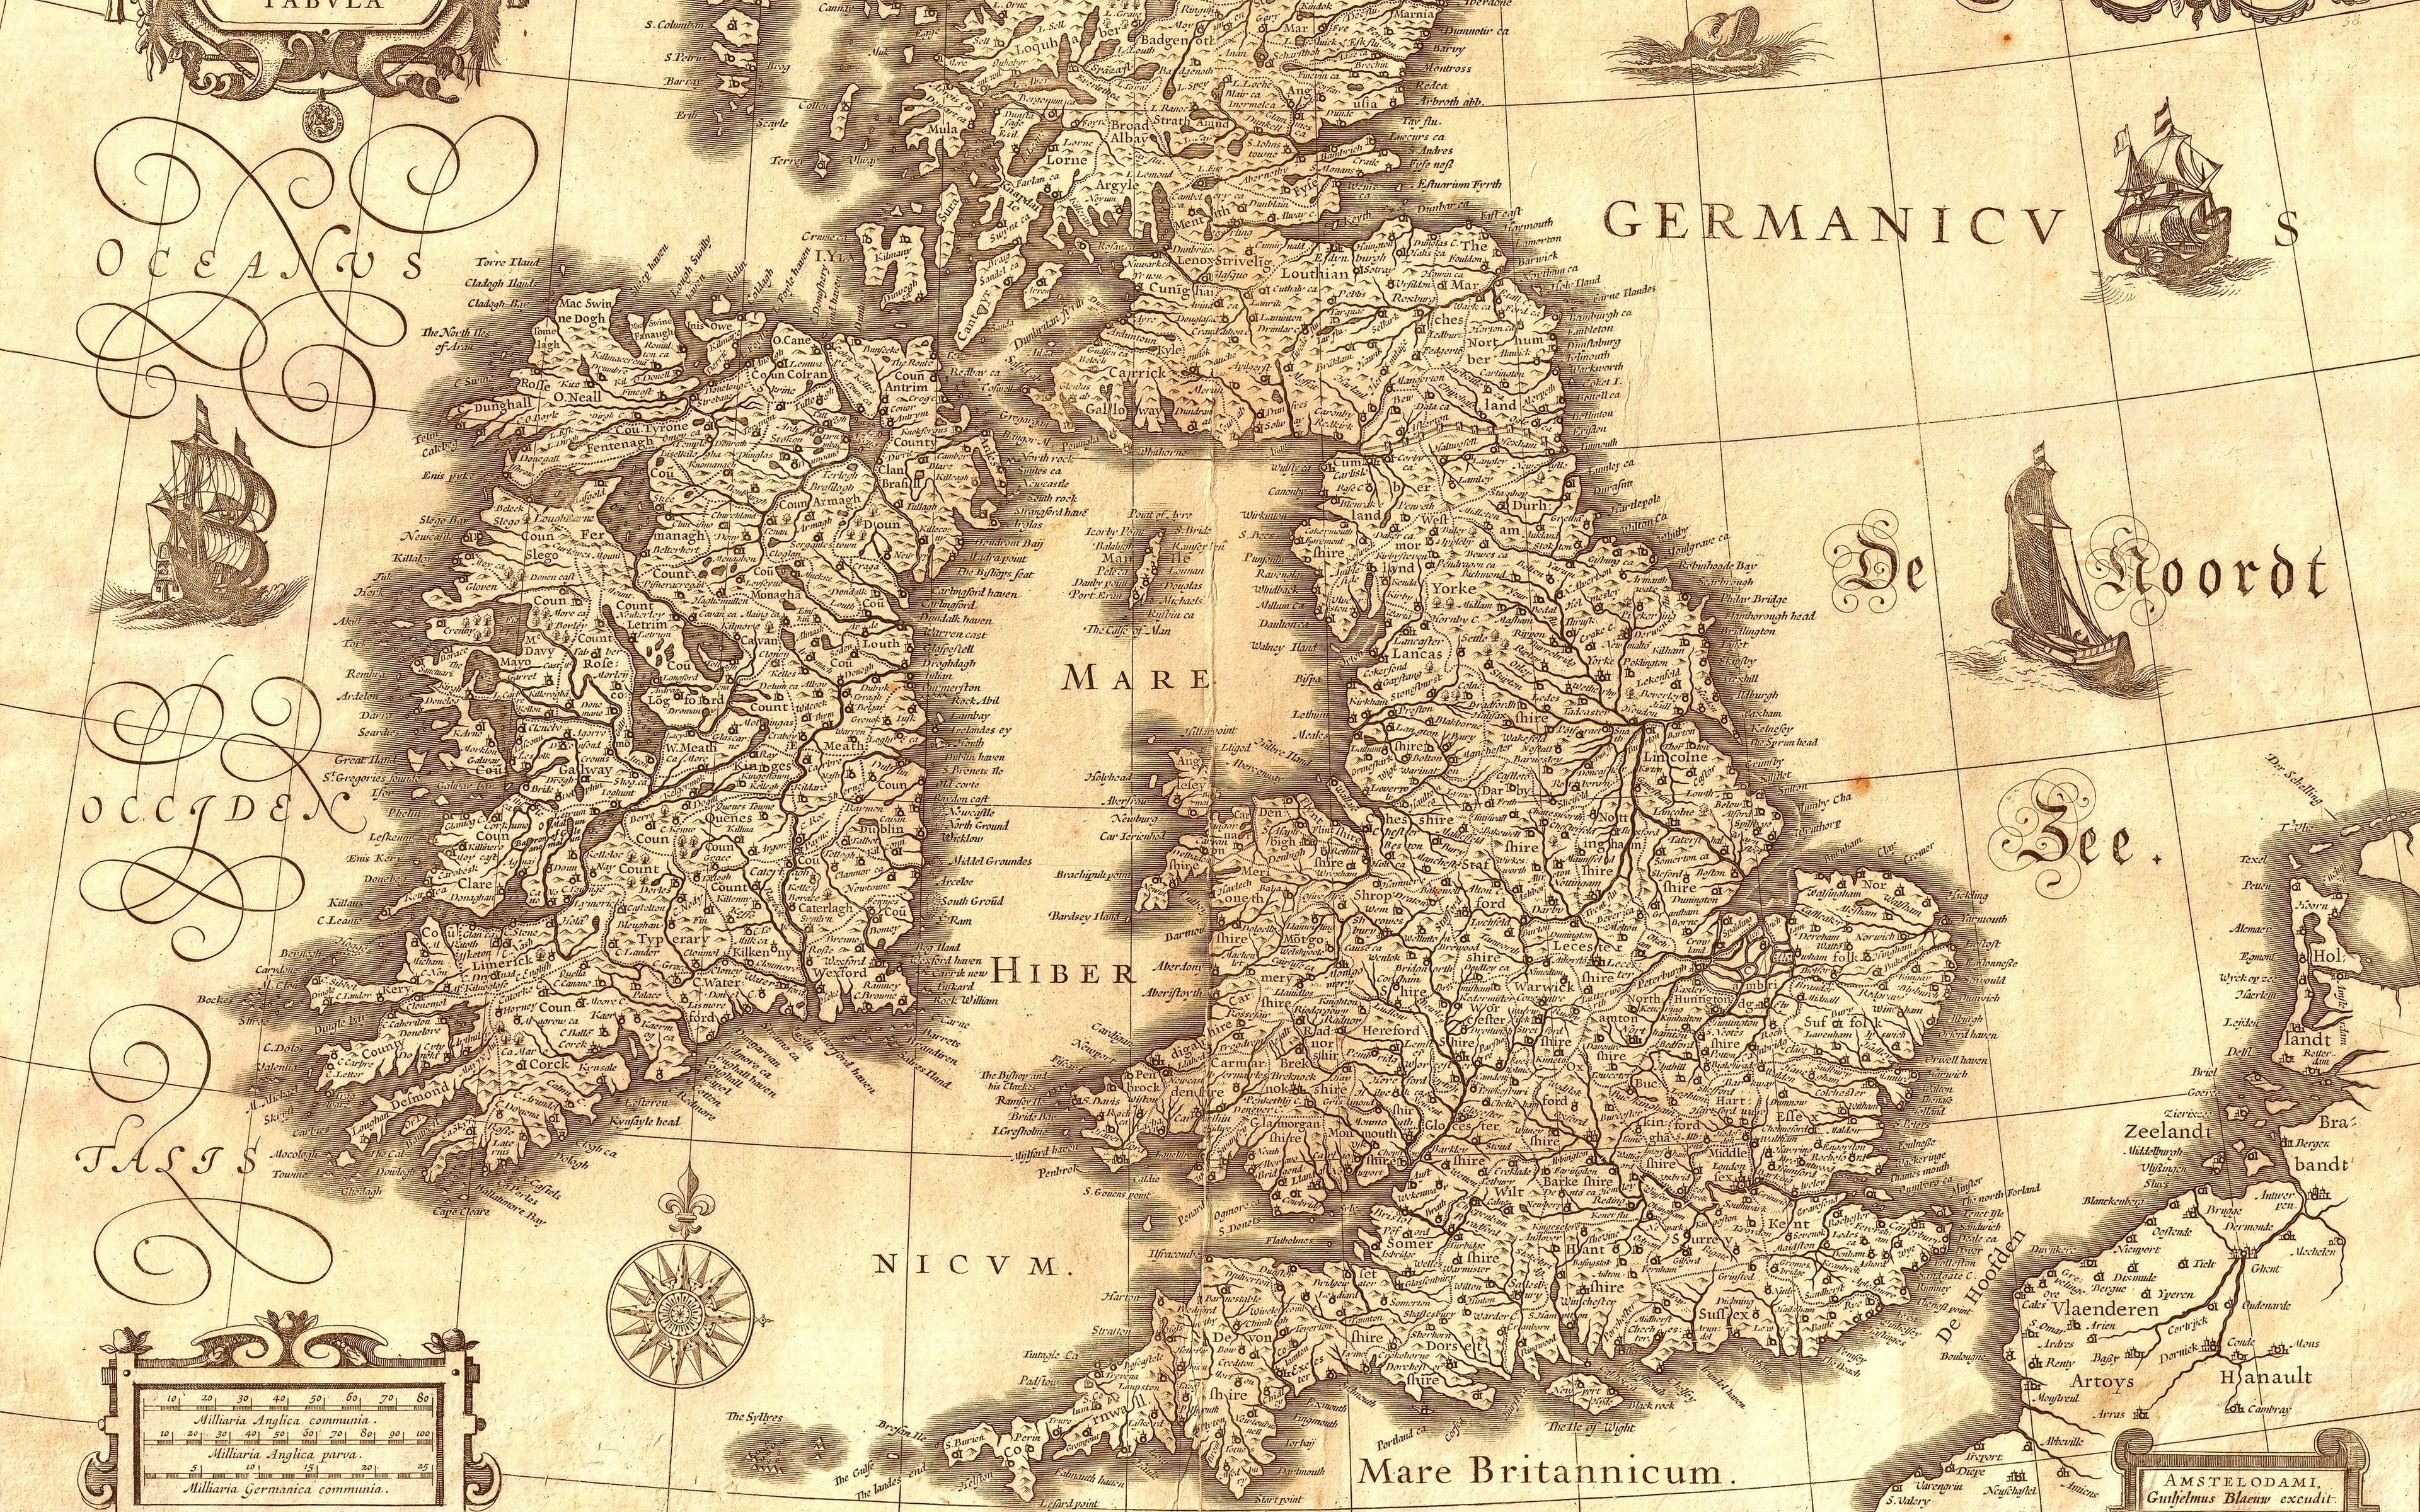 Download wallpaper Map of Great Britain and Ireland, maps of the 17th century, antique maps, United Kingdom, Ireland, map for desktop with resolution 3840x2400. High Quality HD picture wallpaper